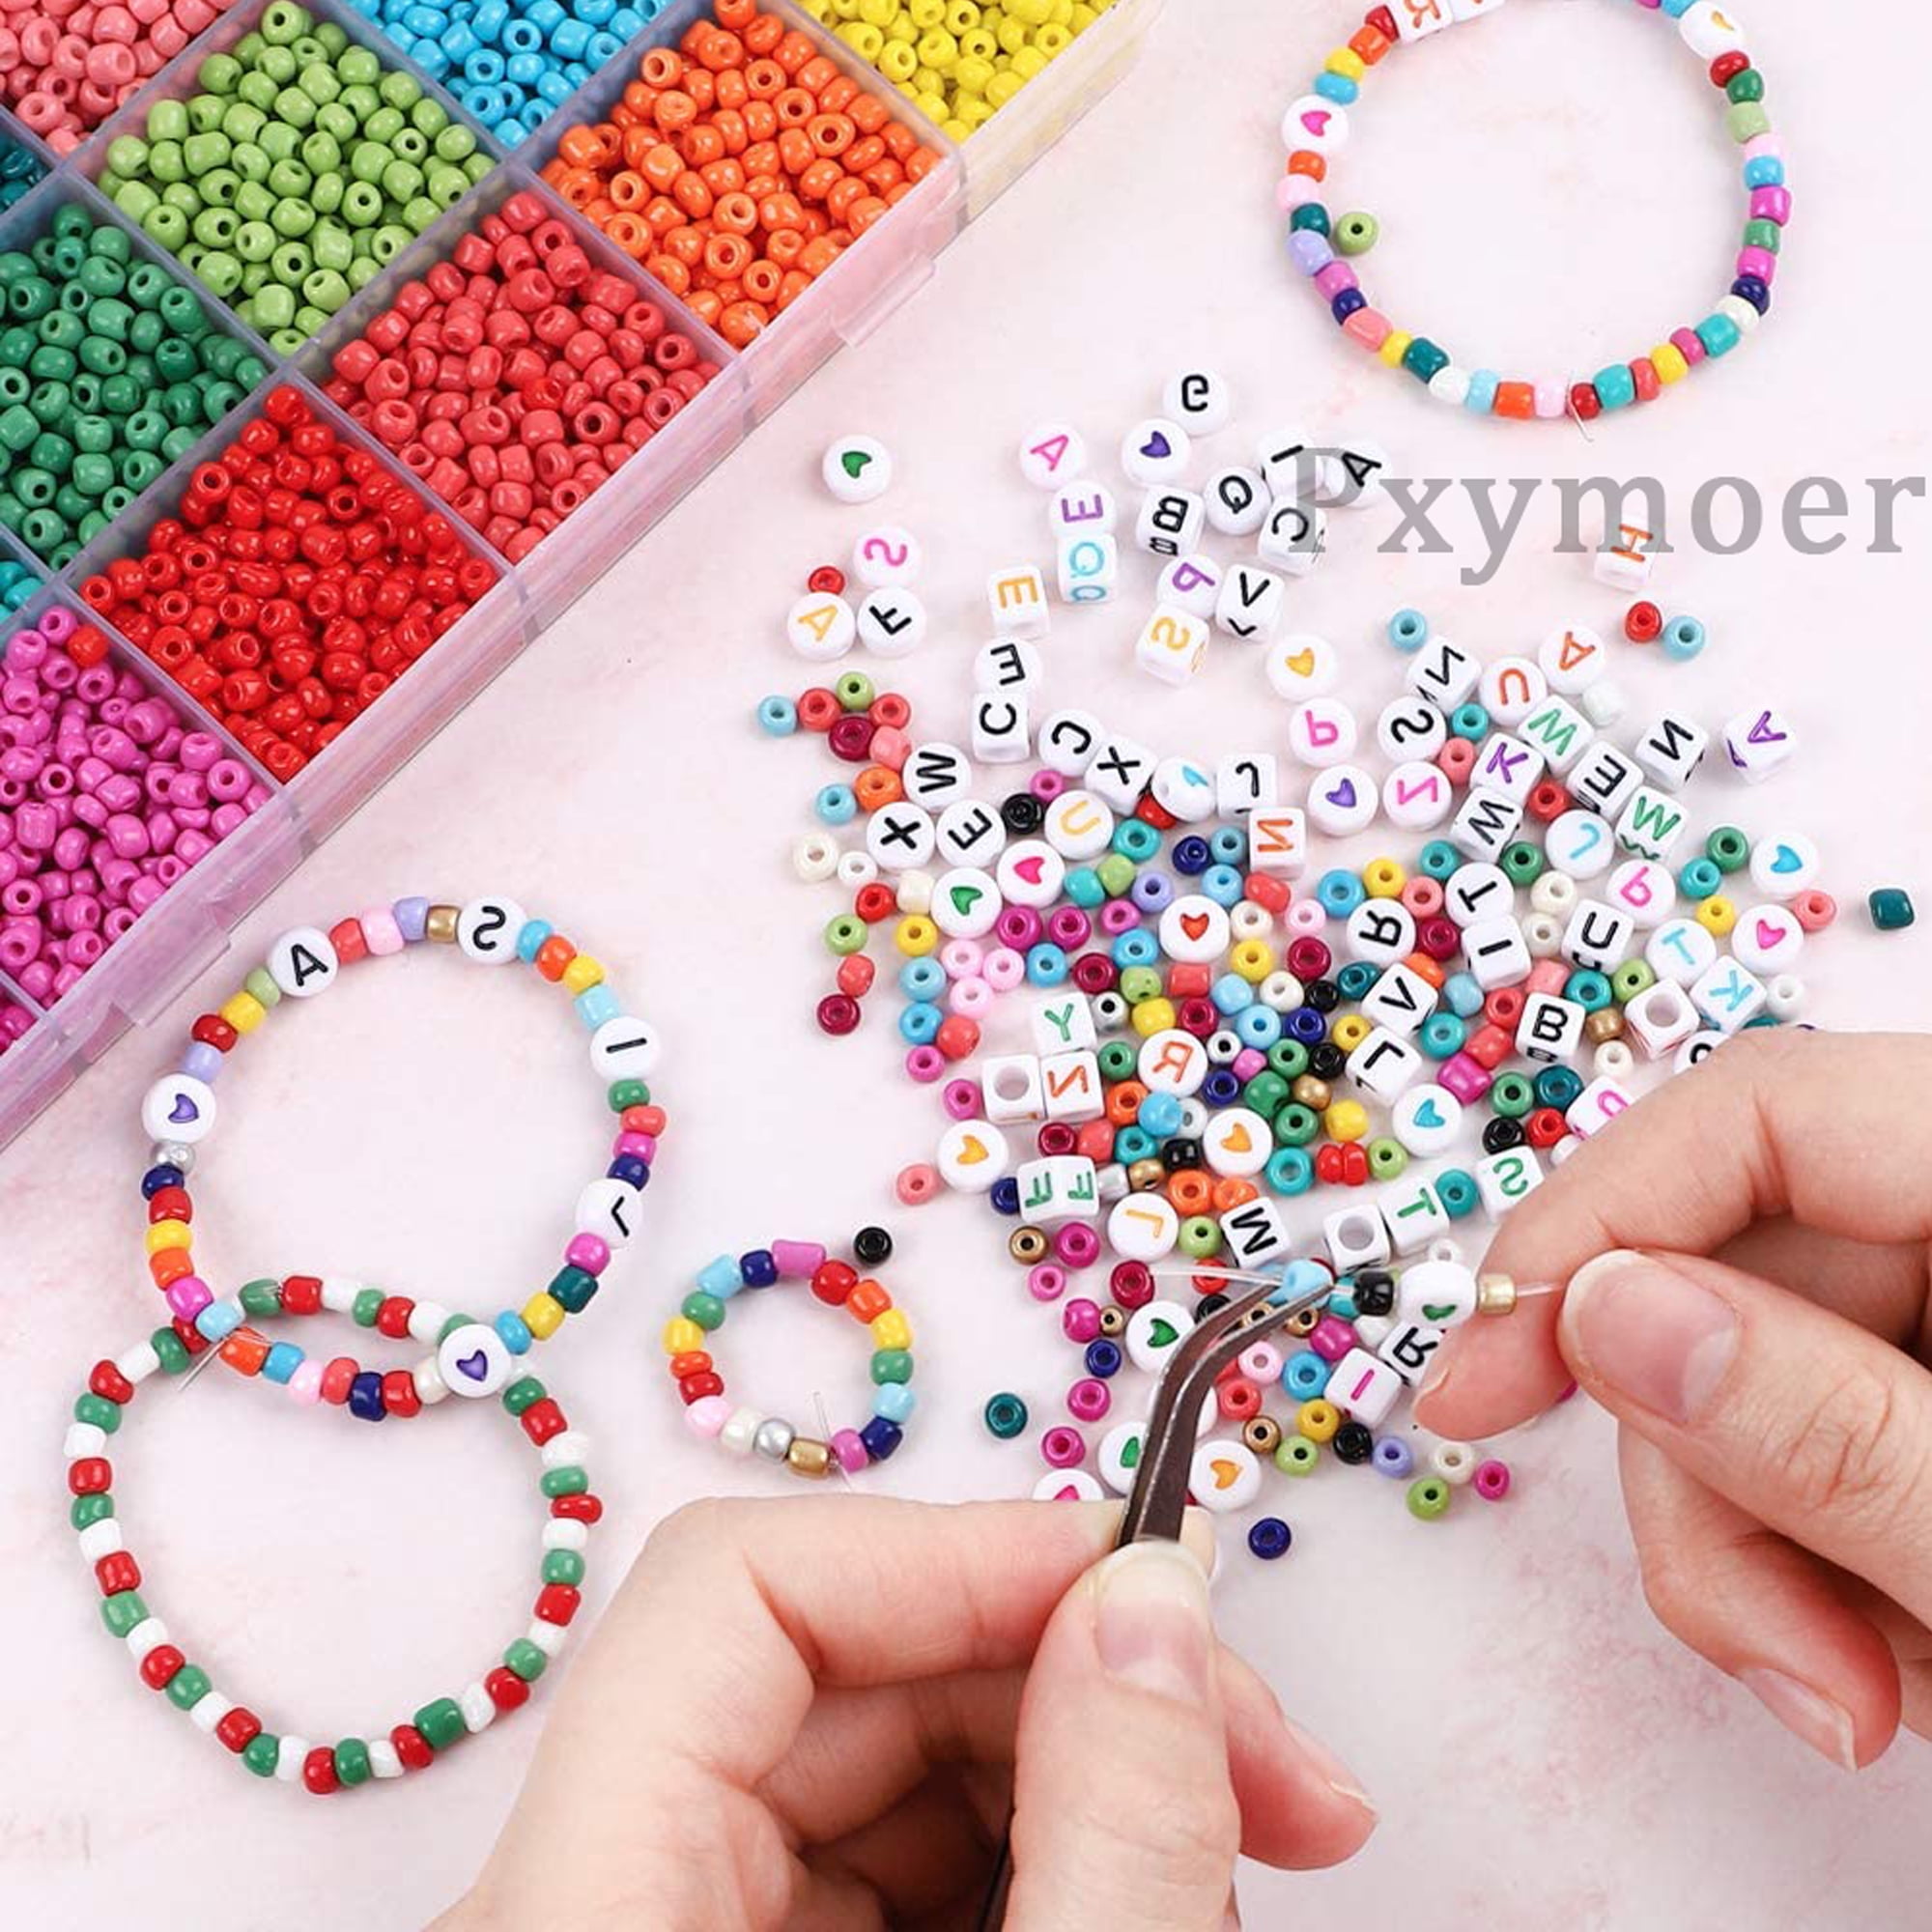 200pcs/lot 5mm Cube Mix Letter Beads Square Russian Alphabet Beads For Jewelry  Making Handmade Diy Bracelet Hair Accessories